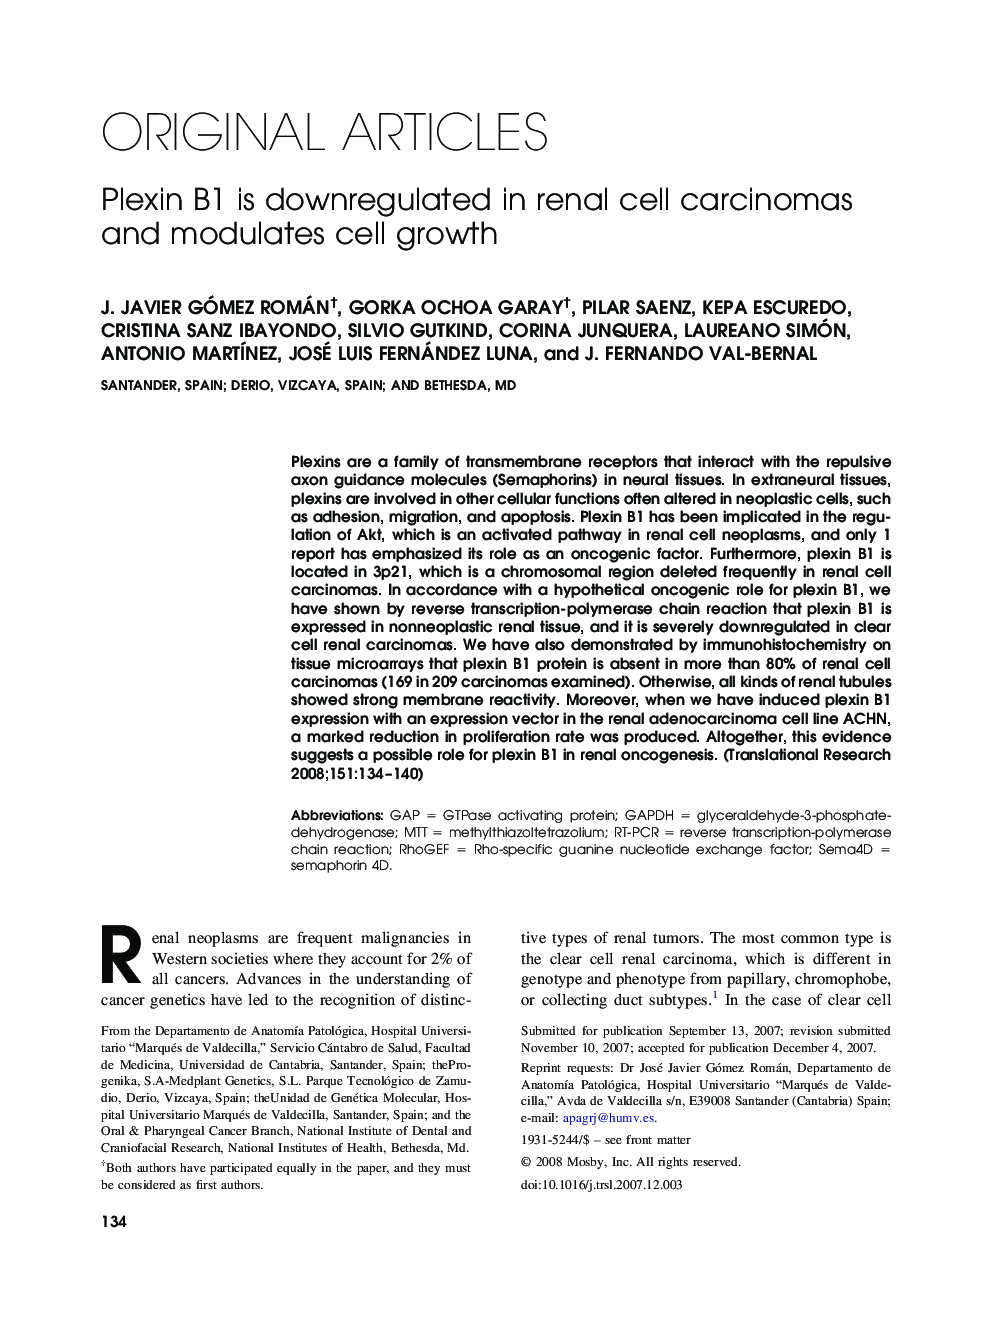 Plexin B1 is downregulated in renal cell carcinomas and modulates cell growth